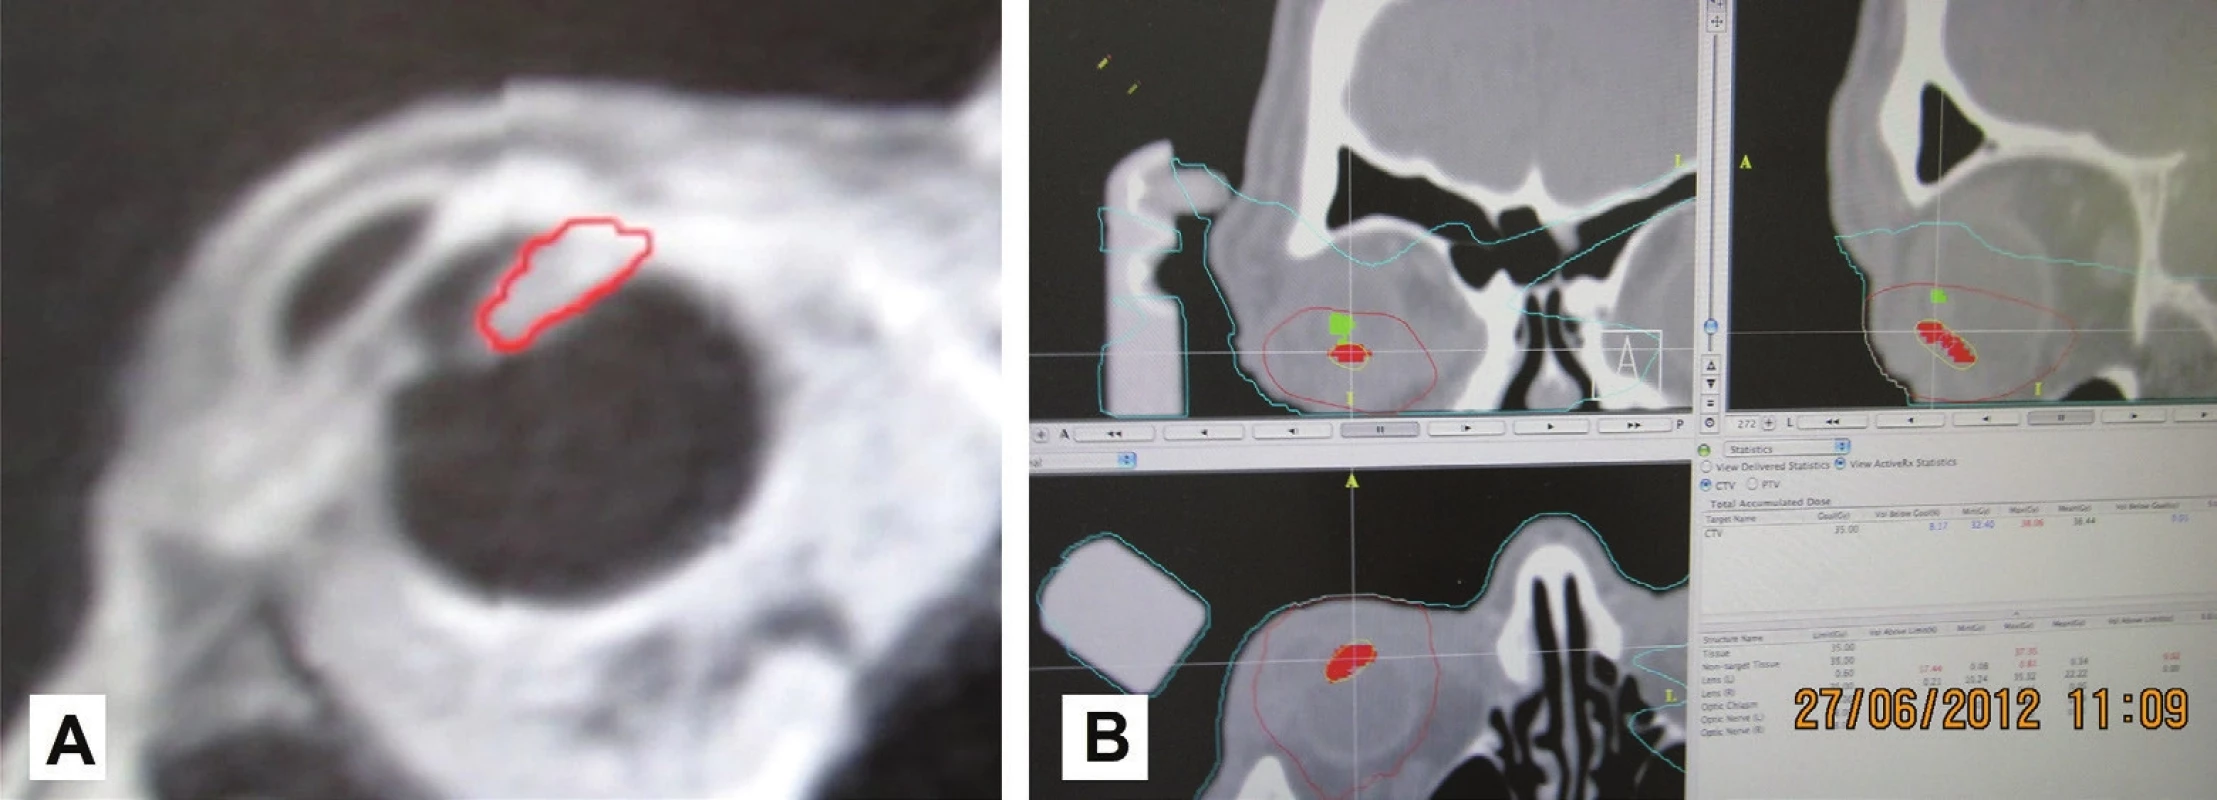 MRI image of patient with sketched tumour in the region of the corpus ciliare with outgrowth in a “forward” direction and into the chamber angle (A), and sketching of the tumour of the corpus ciliare (red colour) and lens (green colour) in the planning scheme for radiosurgical irradiation on a linear accelerator (B)